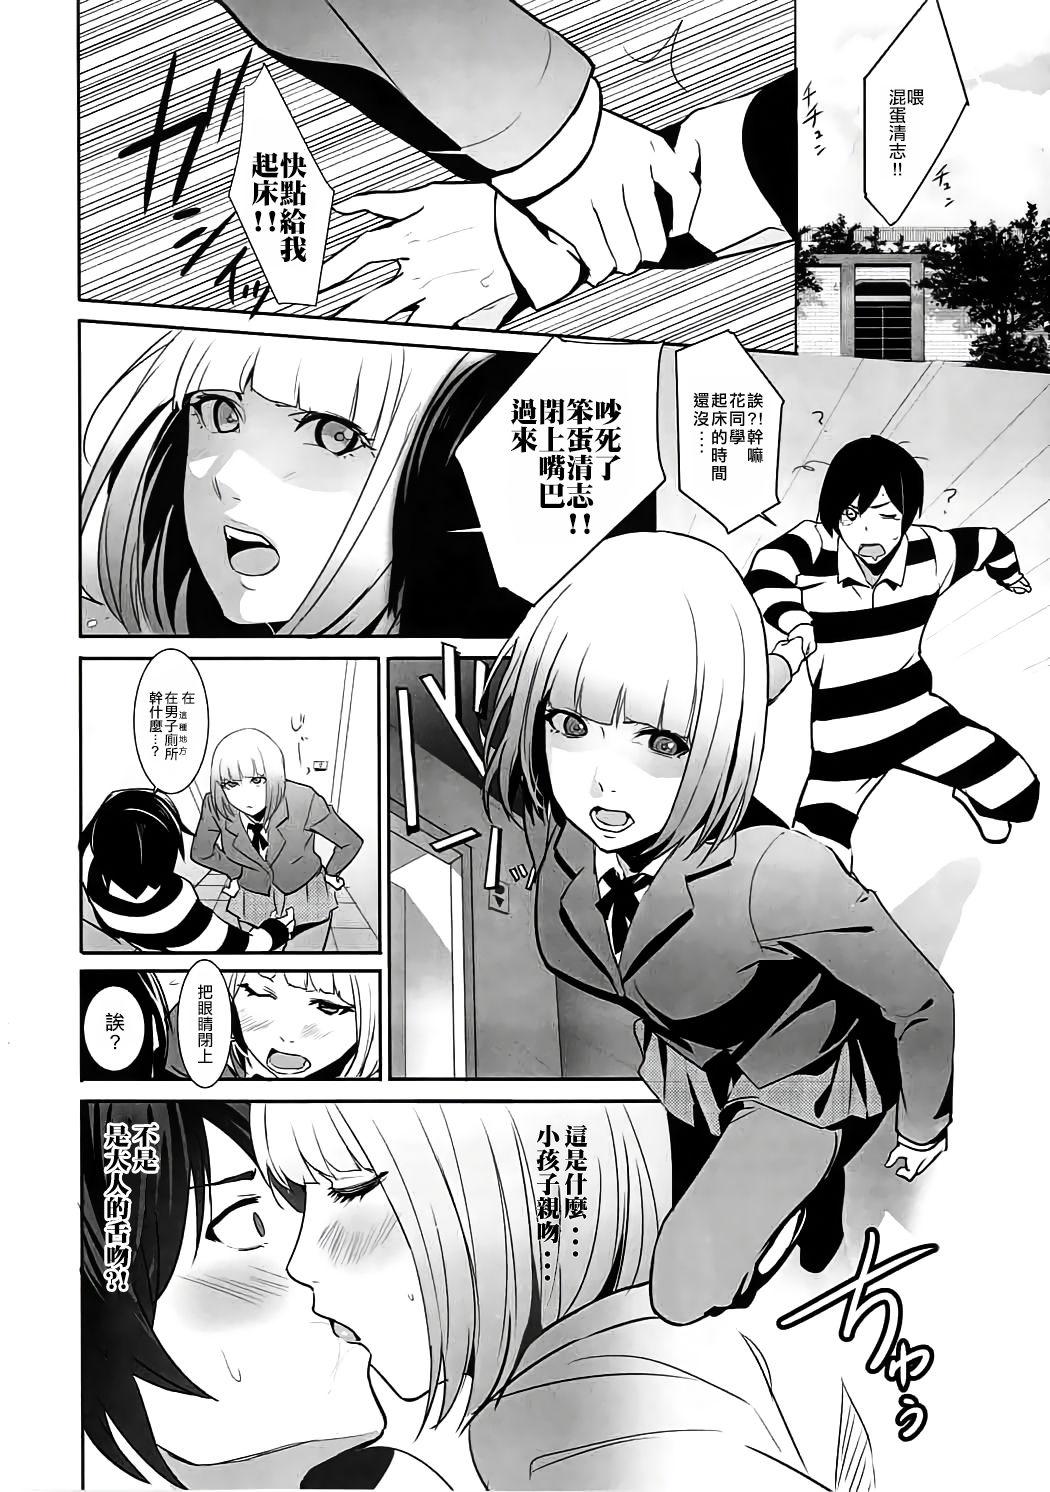 Fucking Pussy Prison Paradise - Prison school Pinoy - Page 5